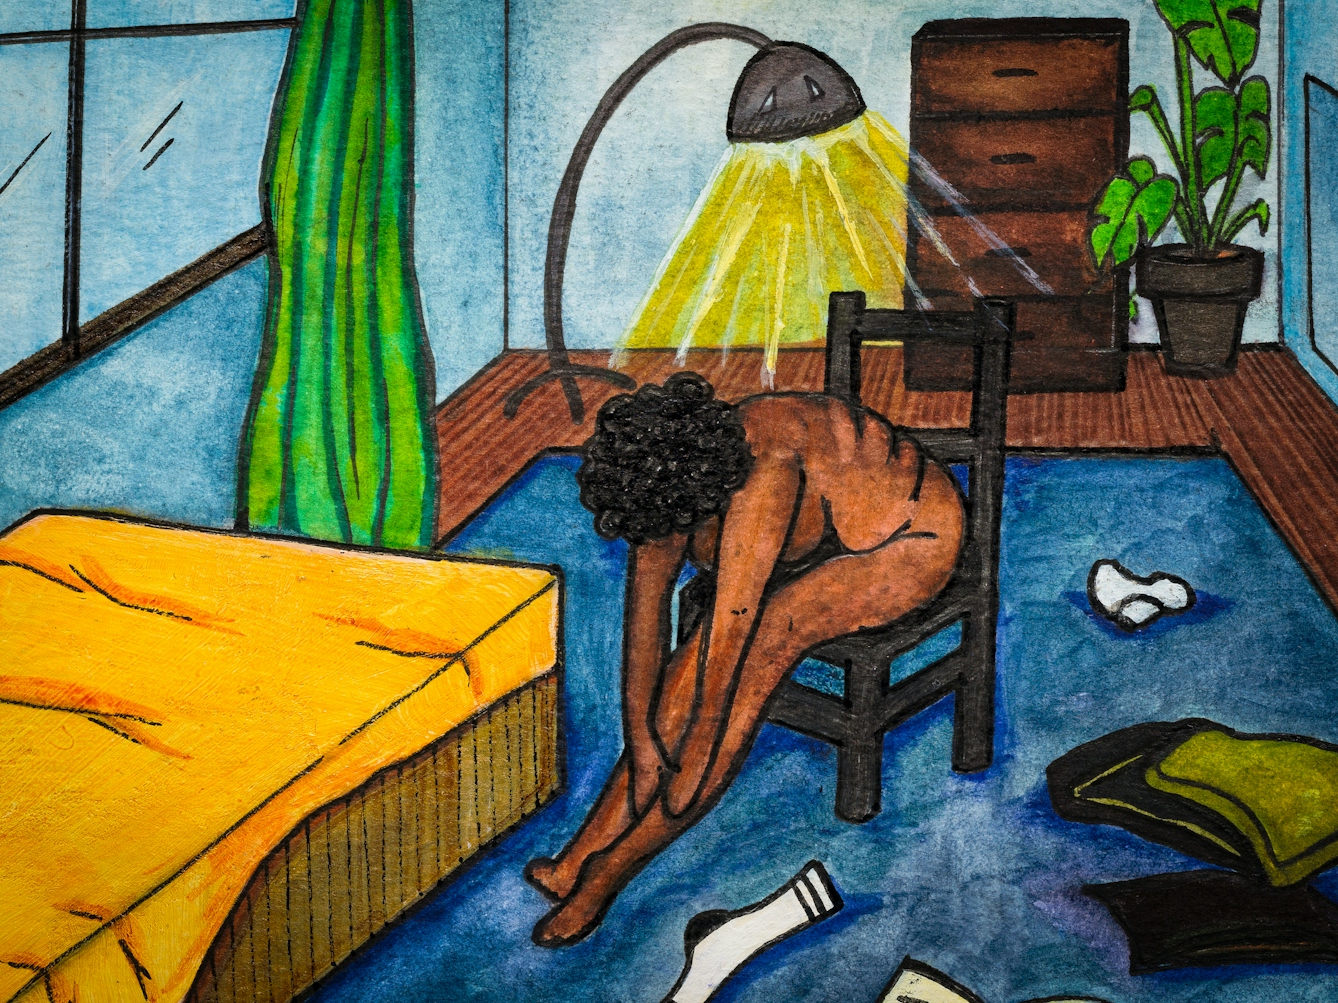 Detail from larger artwork made with paint and ink on textured watercolour paper. The artwork shows a scene in a bedroom with predominantly hues of blues, greens and yellows. To the left is a single bed on the blue carpet. Sat next to the bed on a chair is a naked Black woman. In front of her on the floor is a sock, an open book and pillows. She is stretched forward with her hands near her ankles. Her head is bowed obscuring her face. 